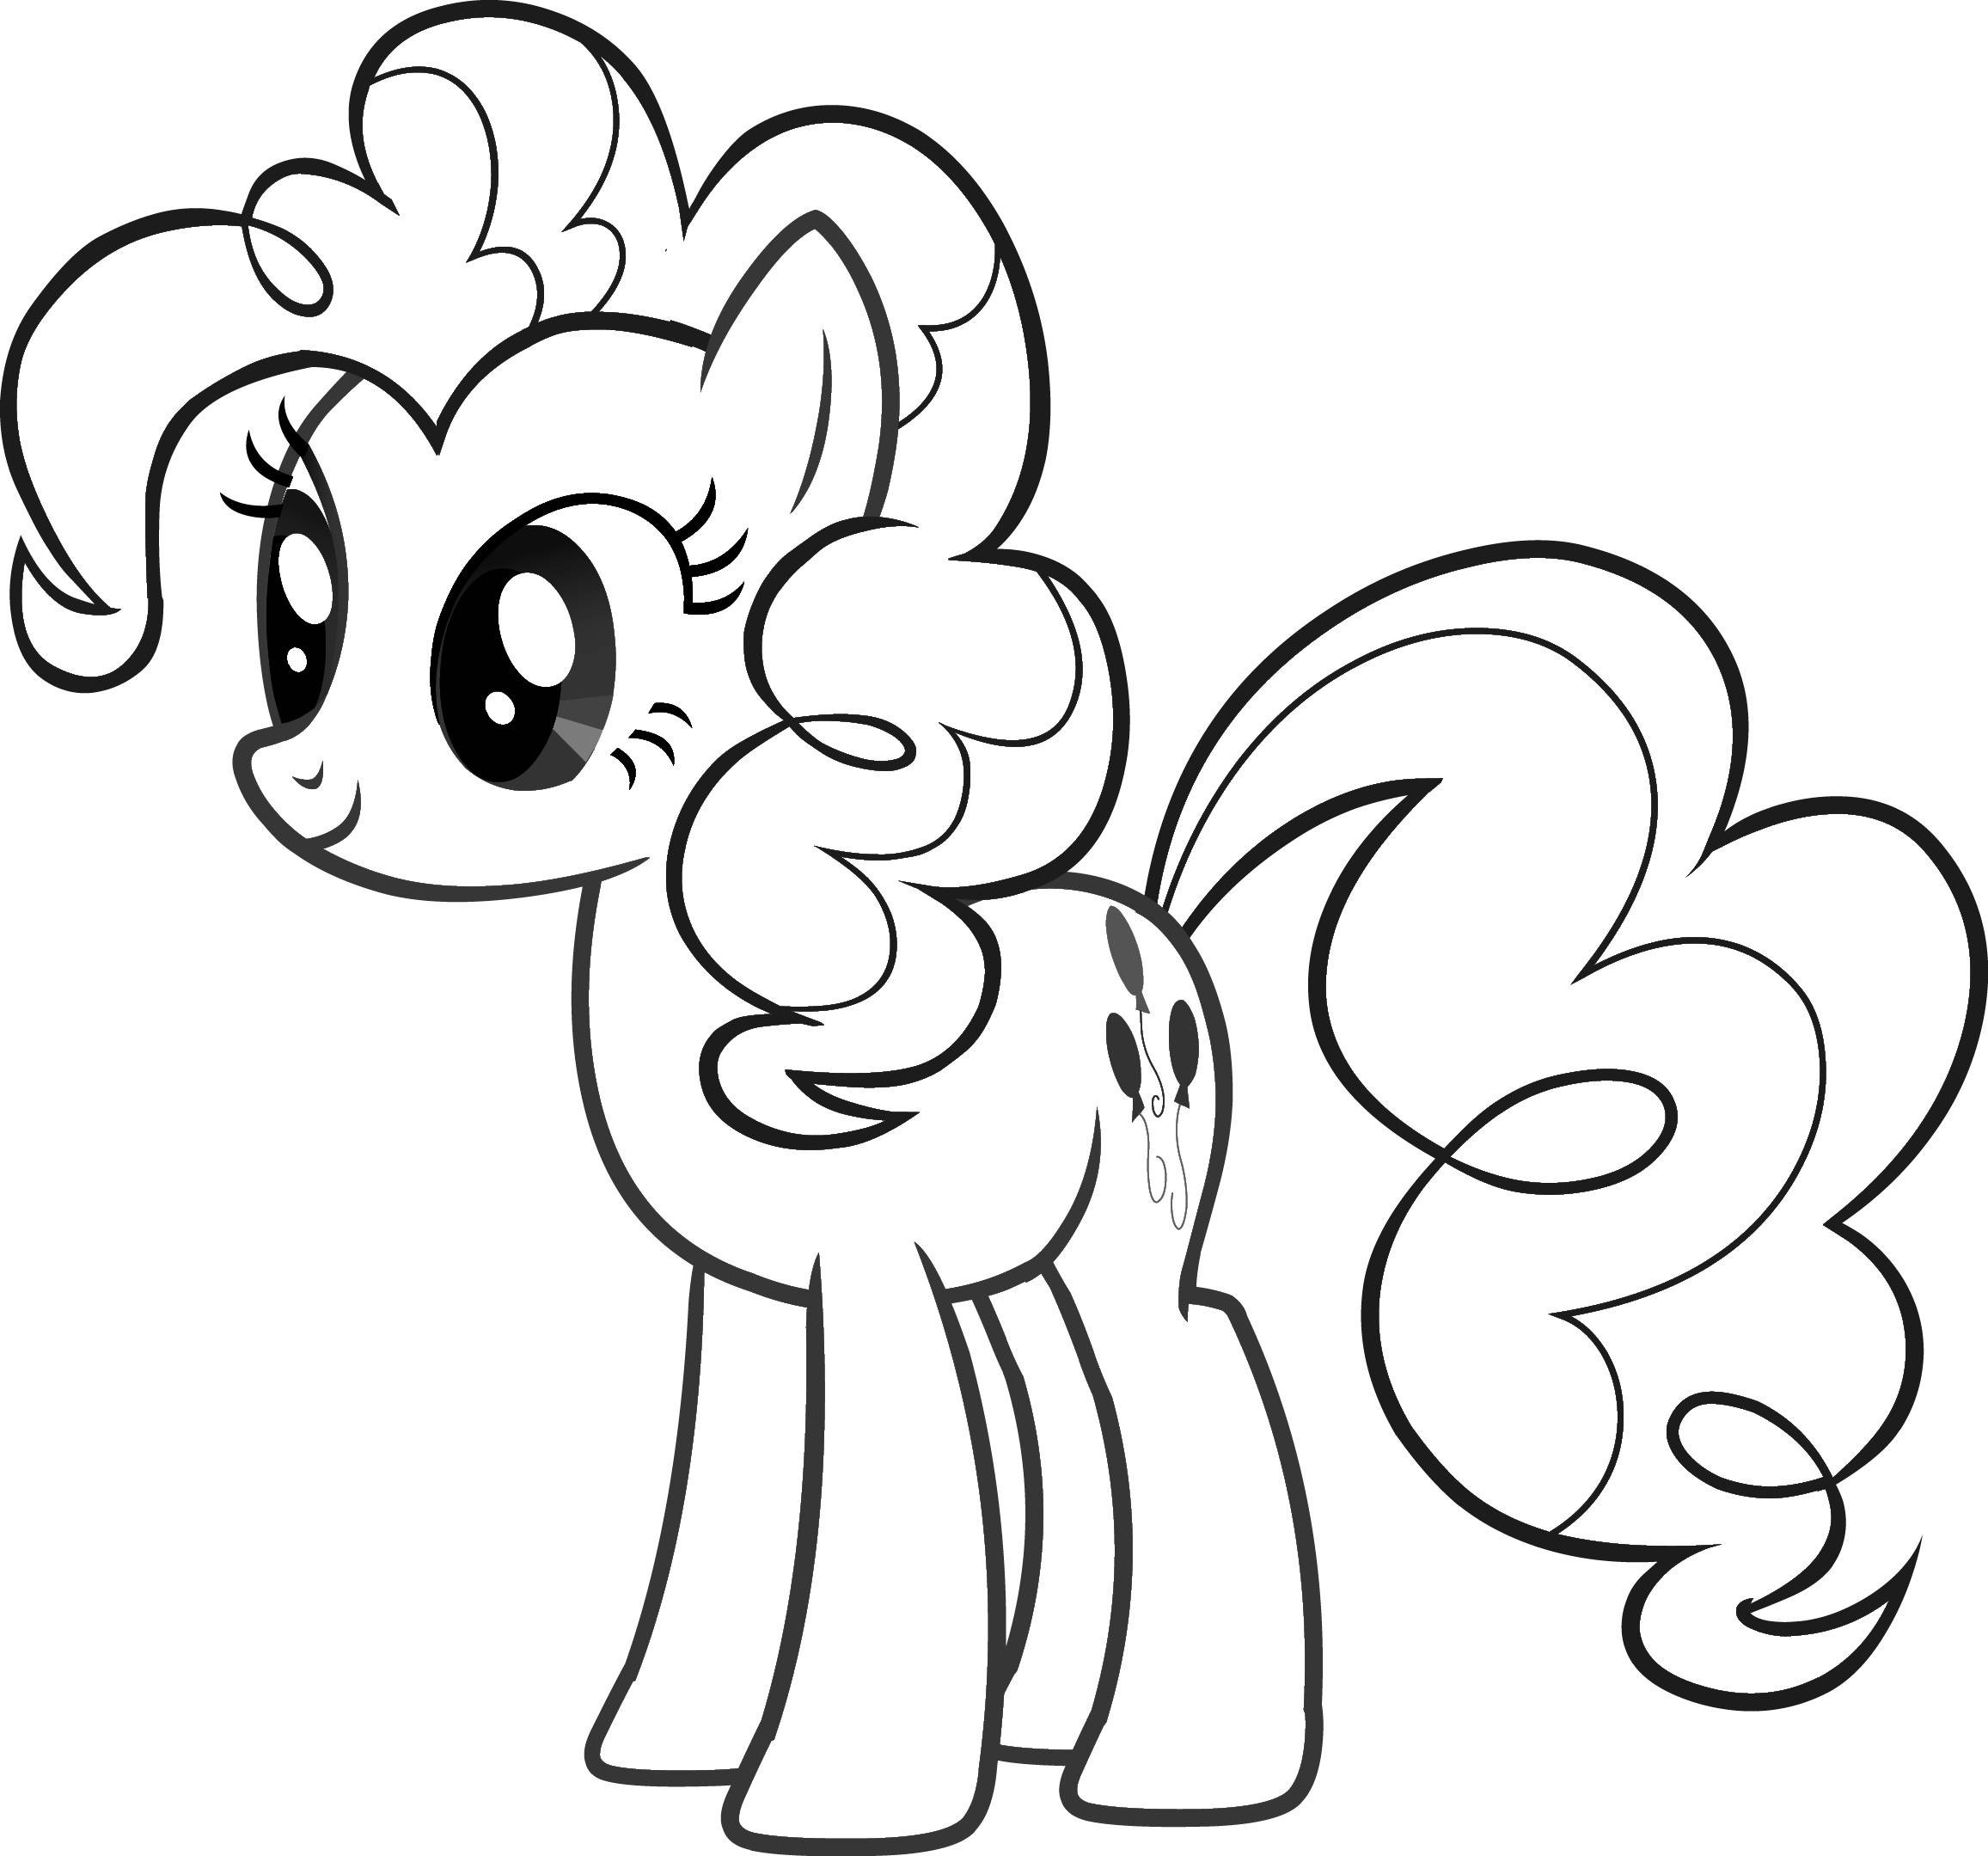 Kids Coloring Pages My Little Pony
 toma un pony